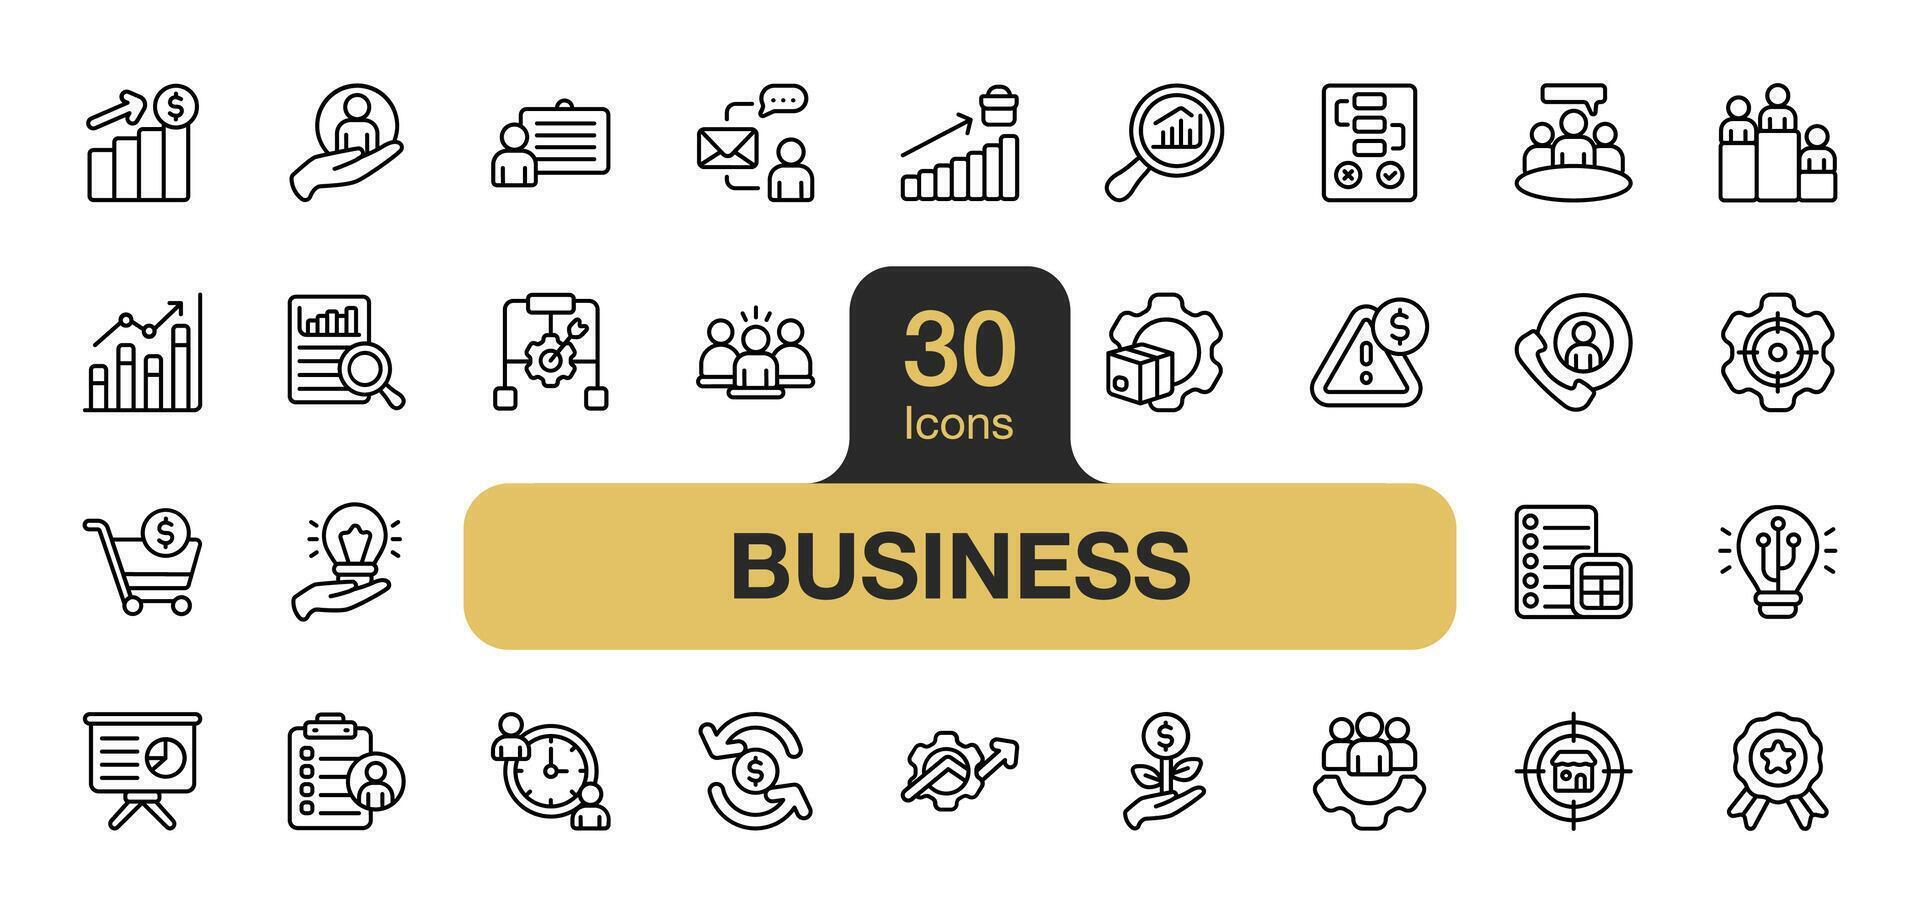 Set of 30 Business icon element set. Includes Data, analysis, marketing, strategy, idea, financial, and More. Outline icons vector collection.